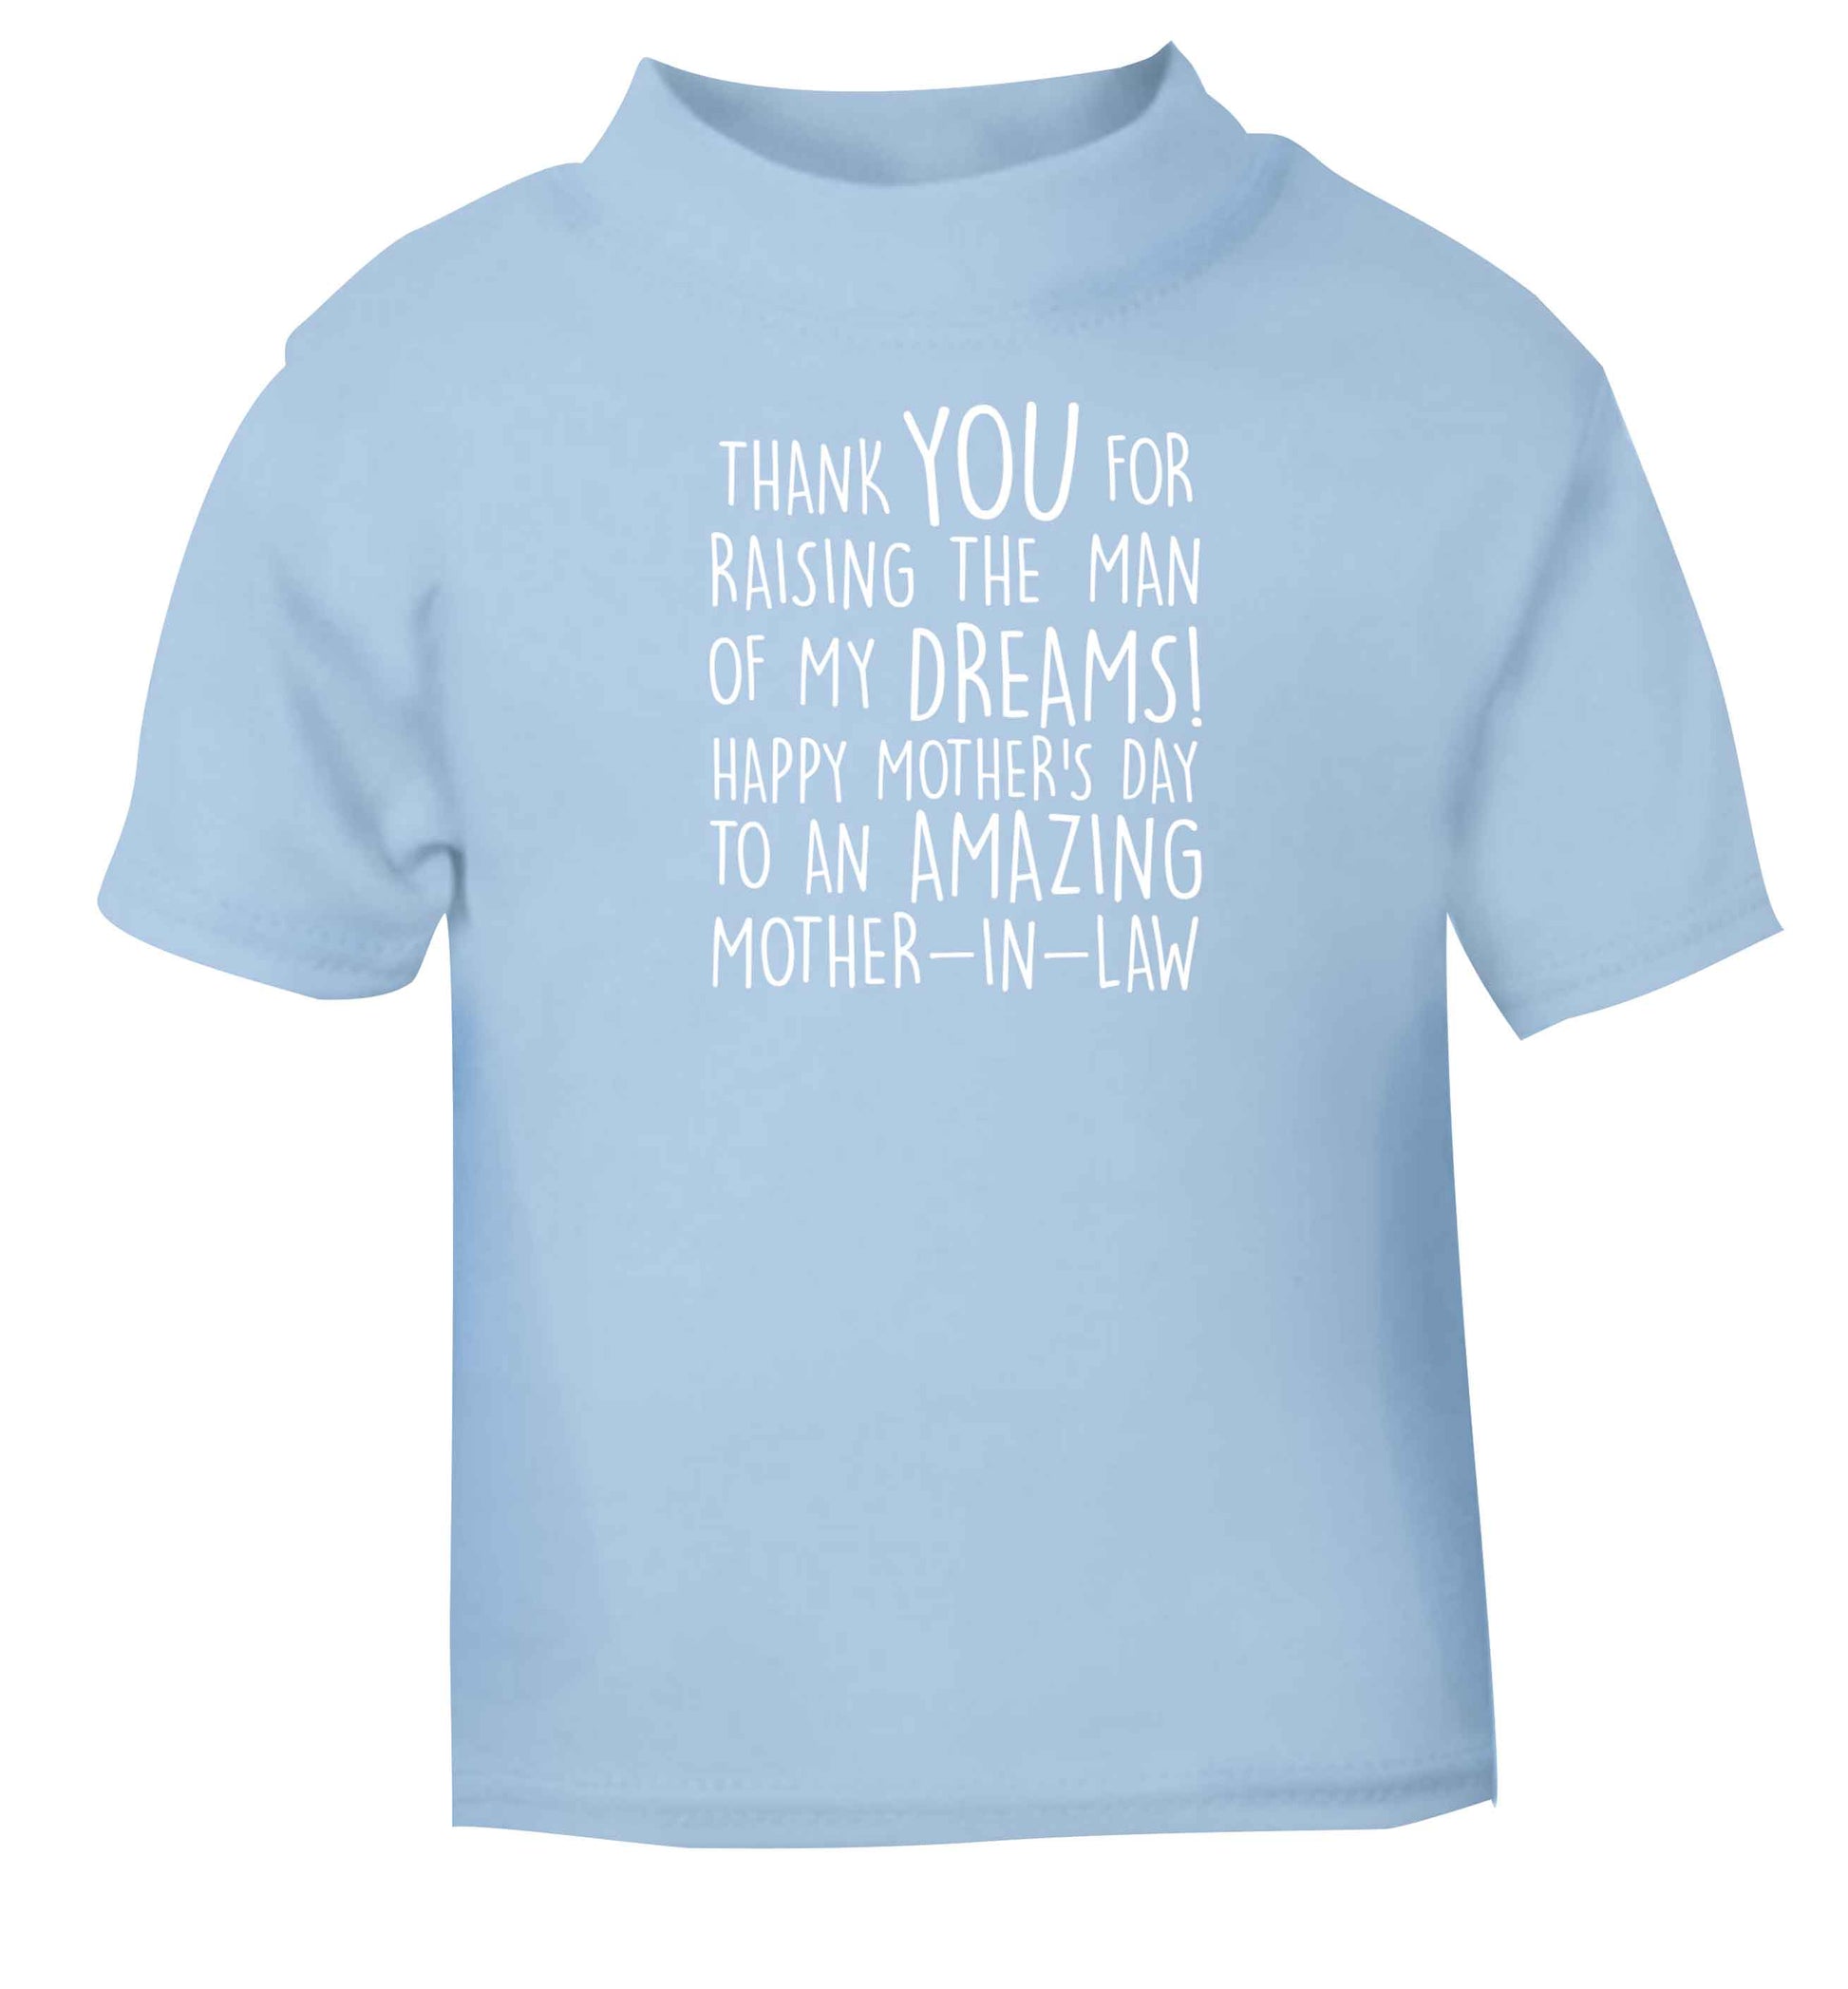 Raising the man of my dreams mother's day mother-in-law light blue baby toddler Tshirt 2 Years